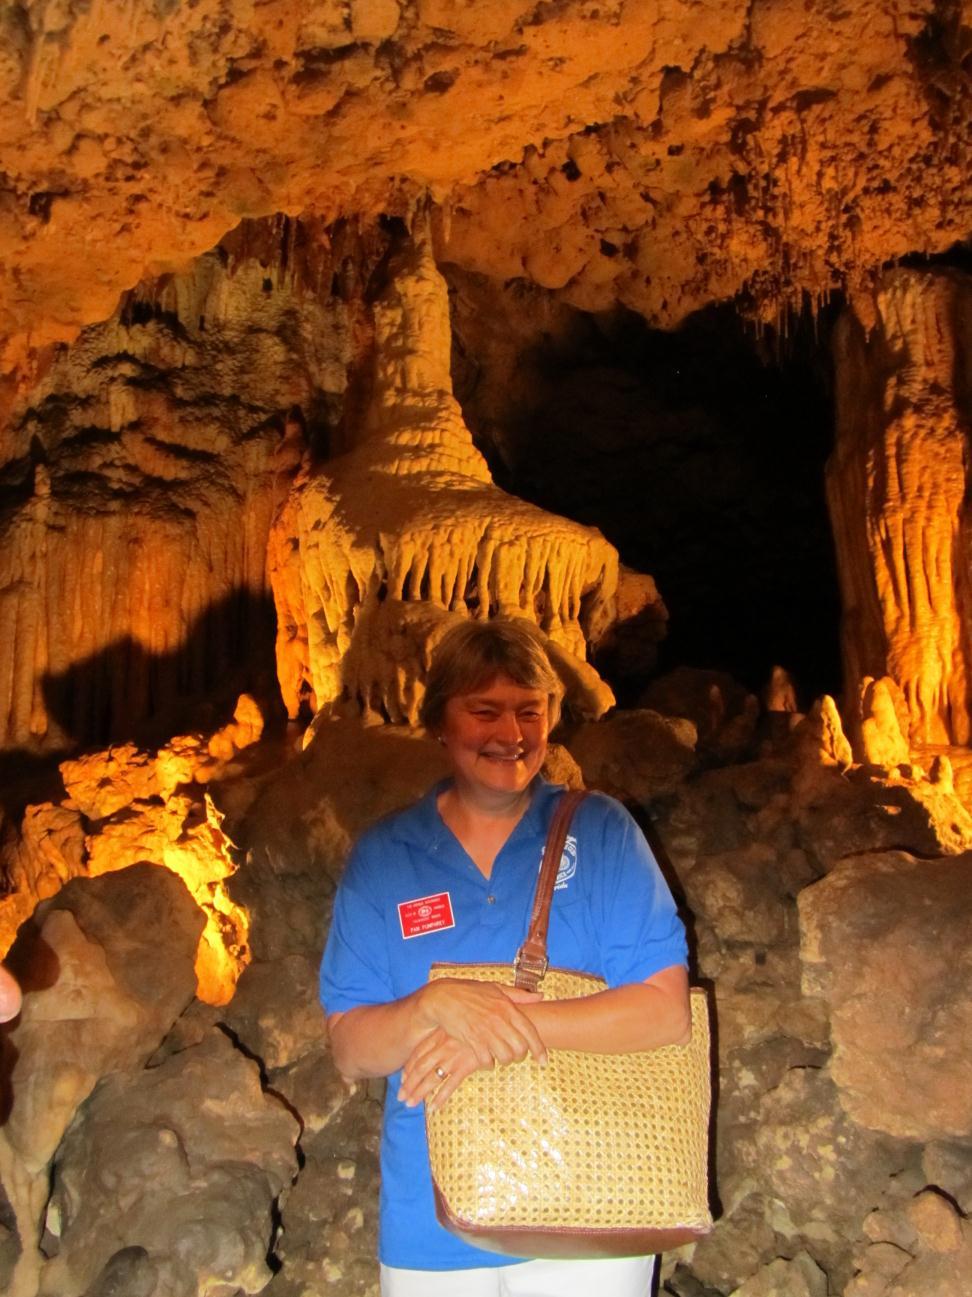 As you move throughout the cave, there are the standard stalactites and stalagmites, but there are also representations of